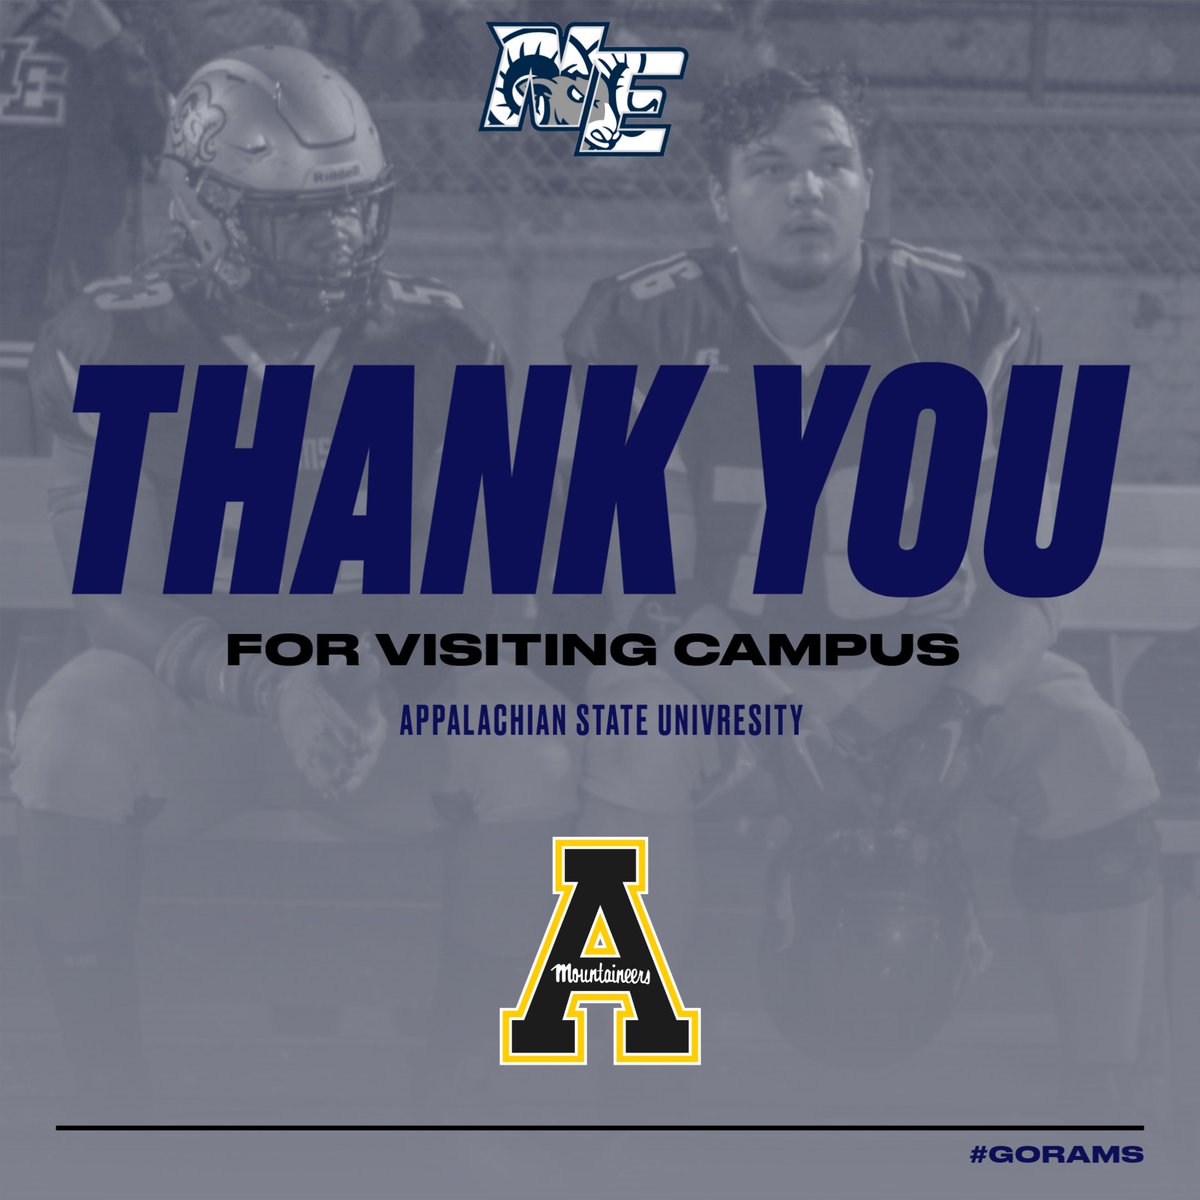 We kicked off Friday in Ram Nation with a visit from @CoachM_Cummings & @AppState_FB. It was great catching up with coach & talking with him about our student athletes. #RamNation #GoApp #RockBoyz24